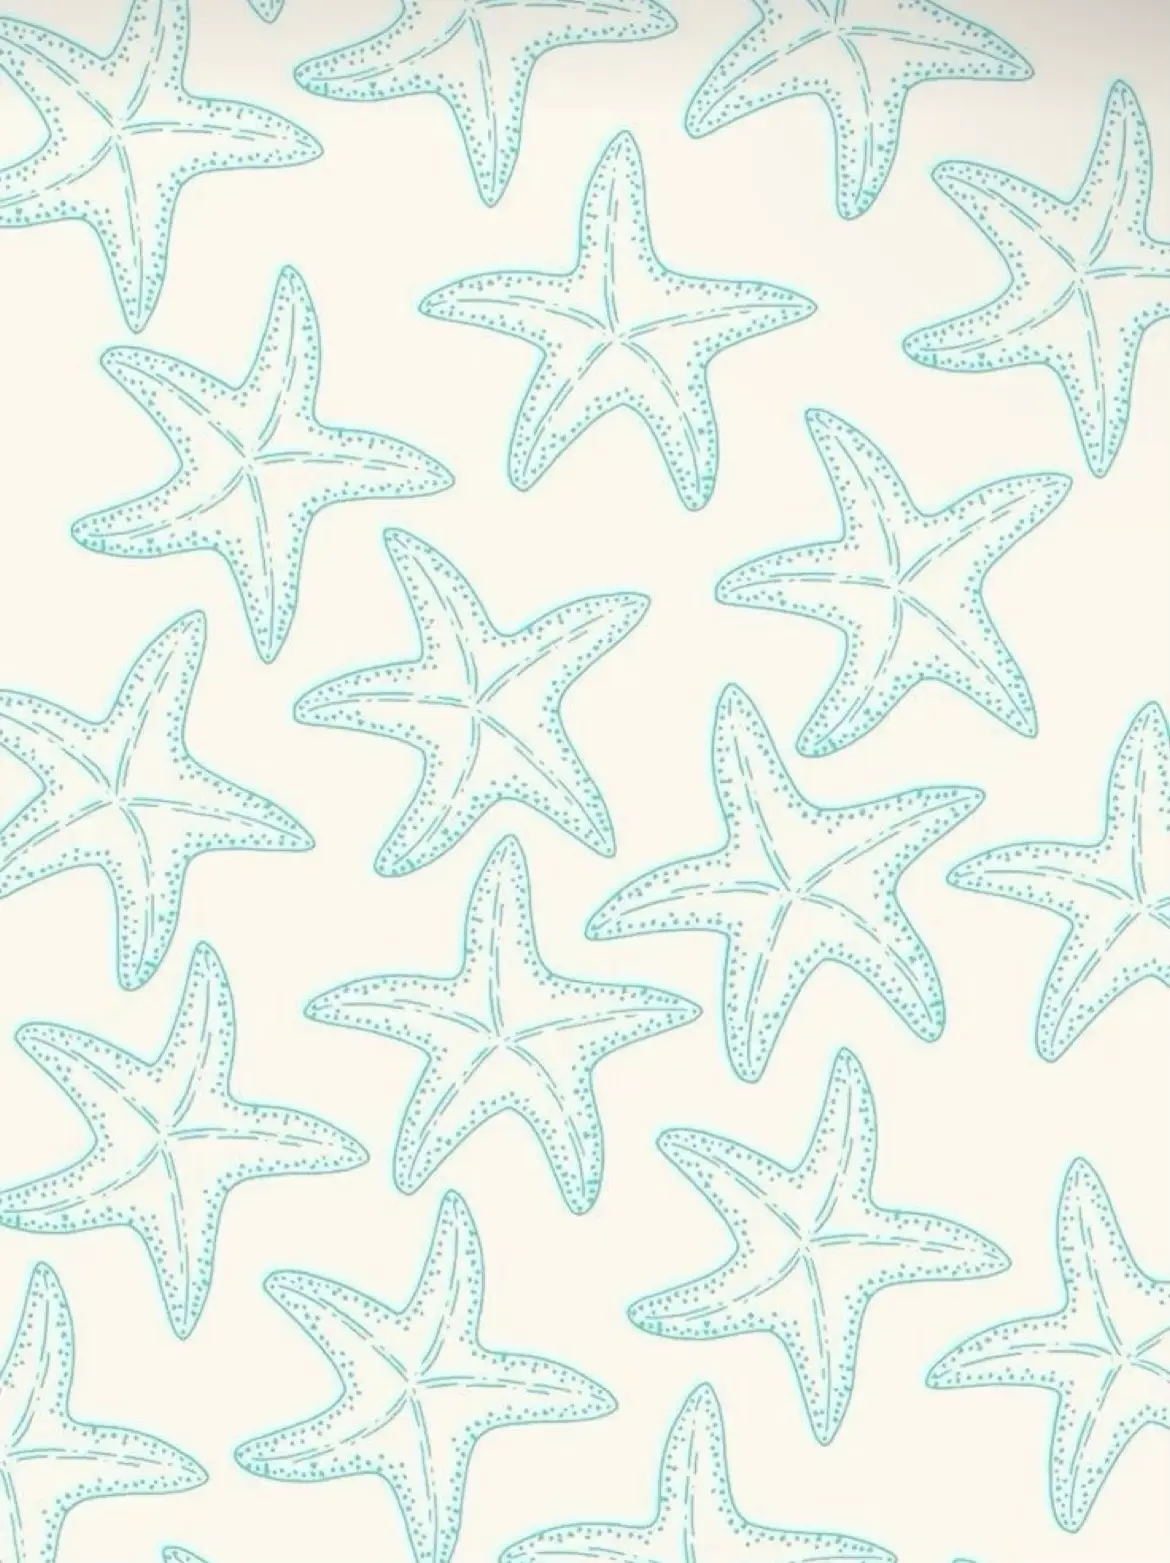 Preppy Bitmoji Pfp, An excellent mobile wallpaper with a preppy PFP design  featuring layers of stars and butterflies separated by curve lines with a  blue theme.